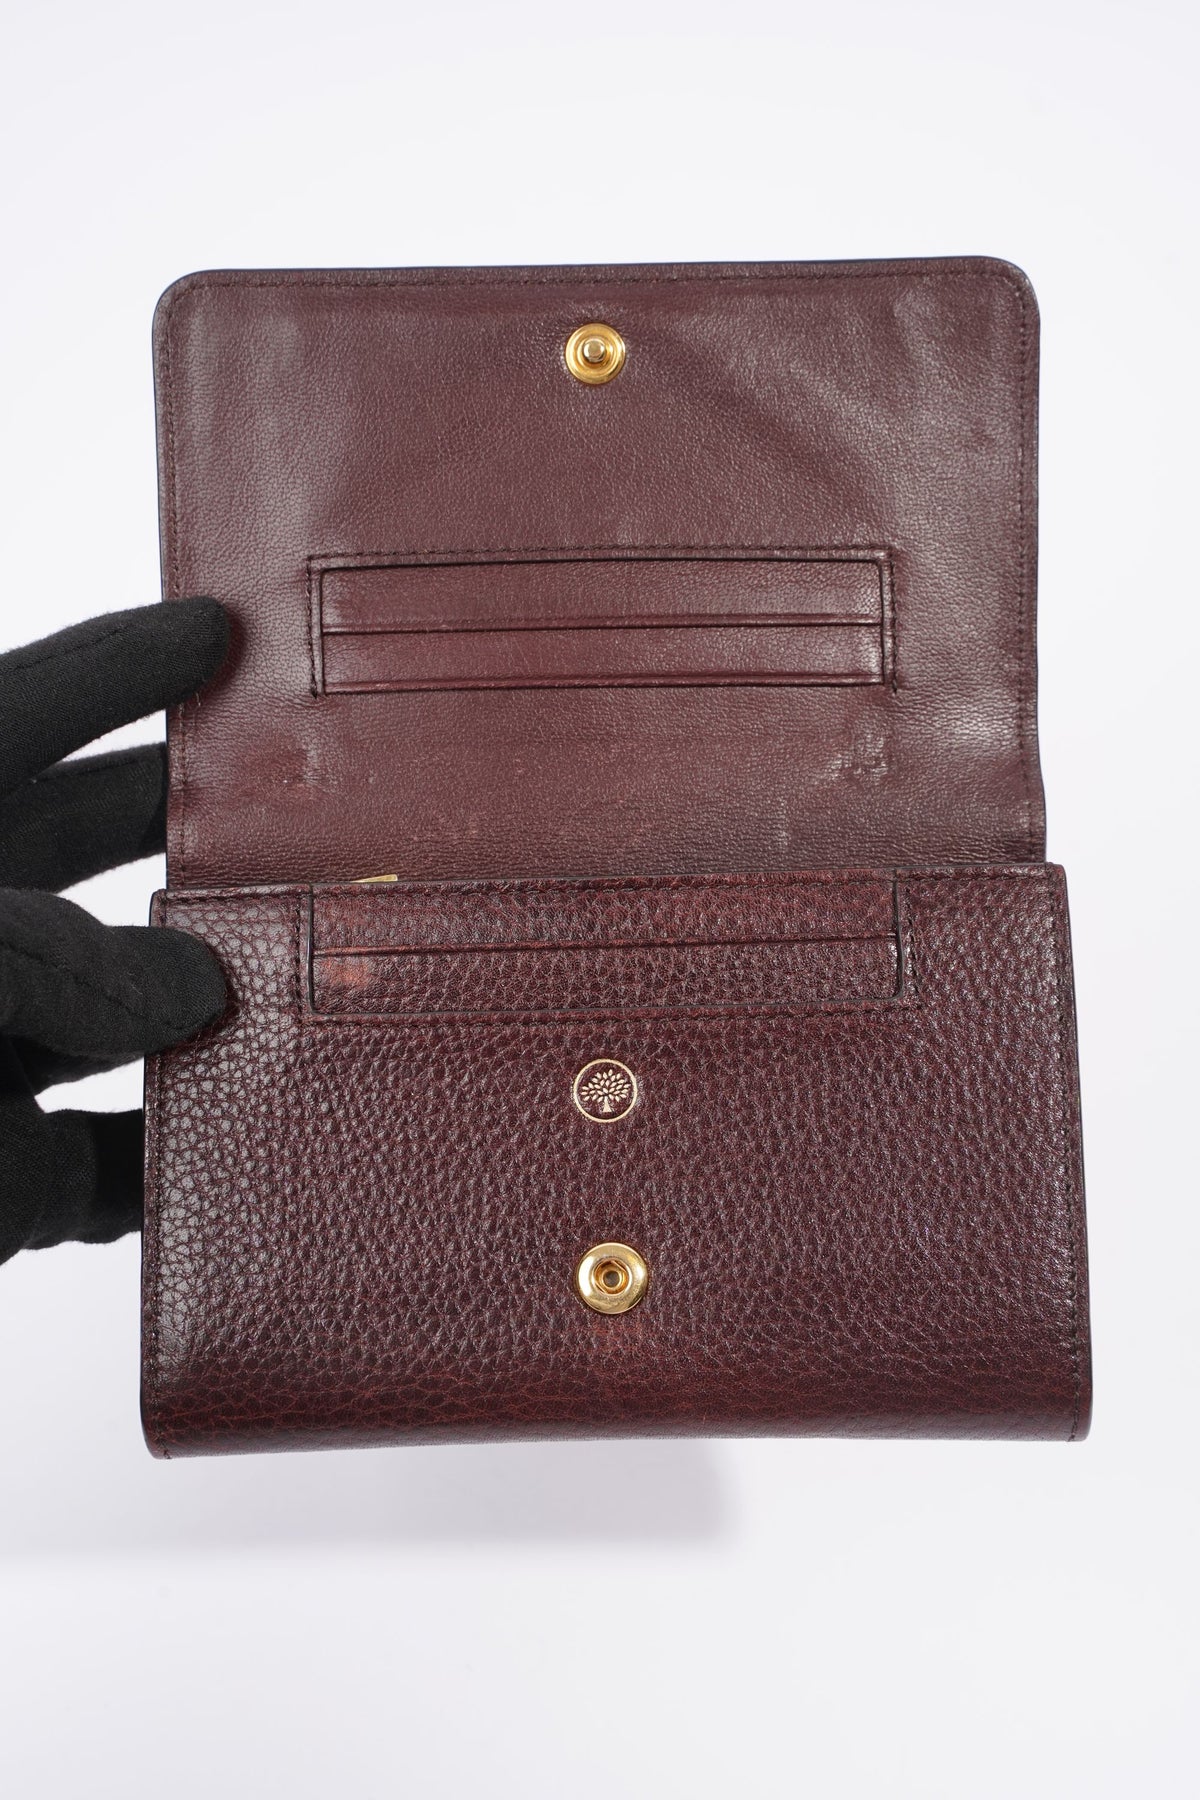 Mulberry purse | Vinted